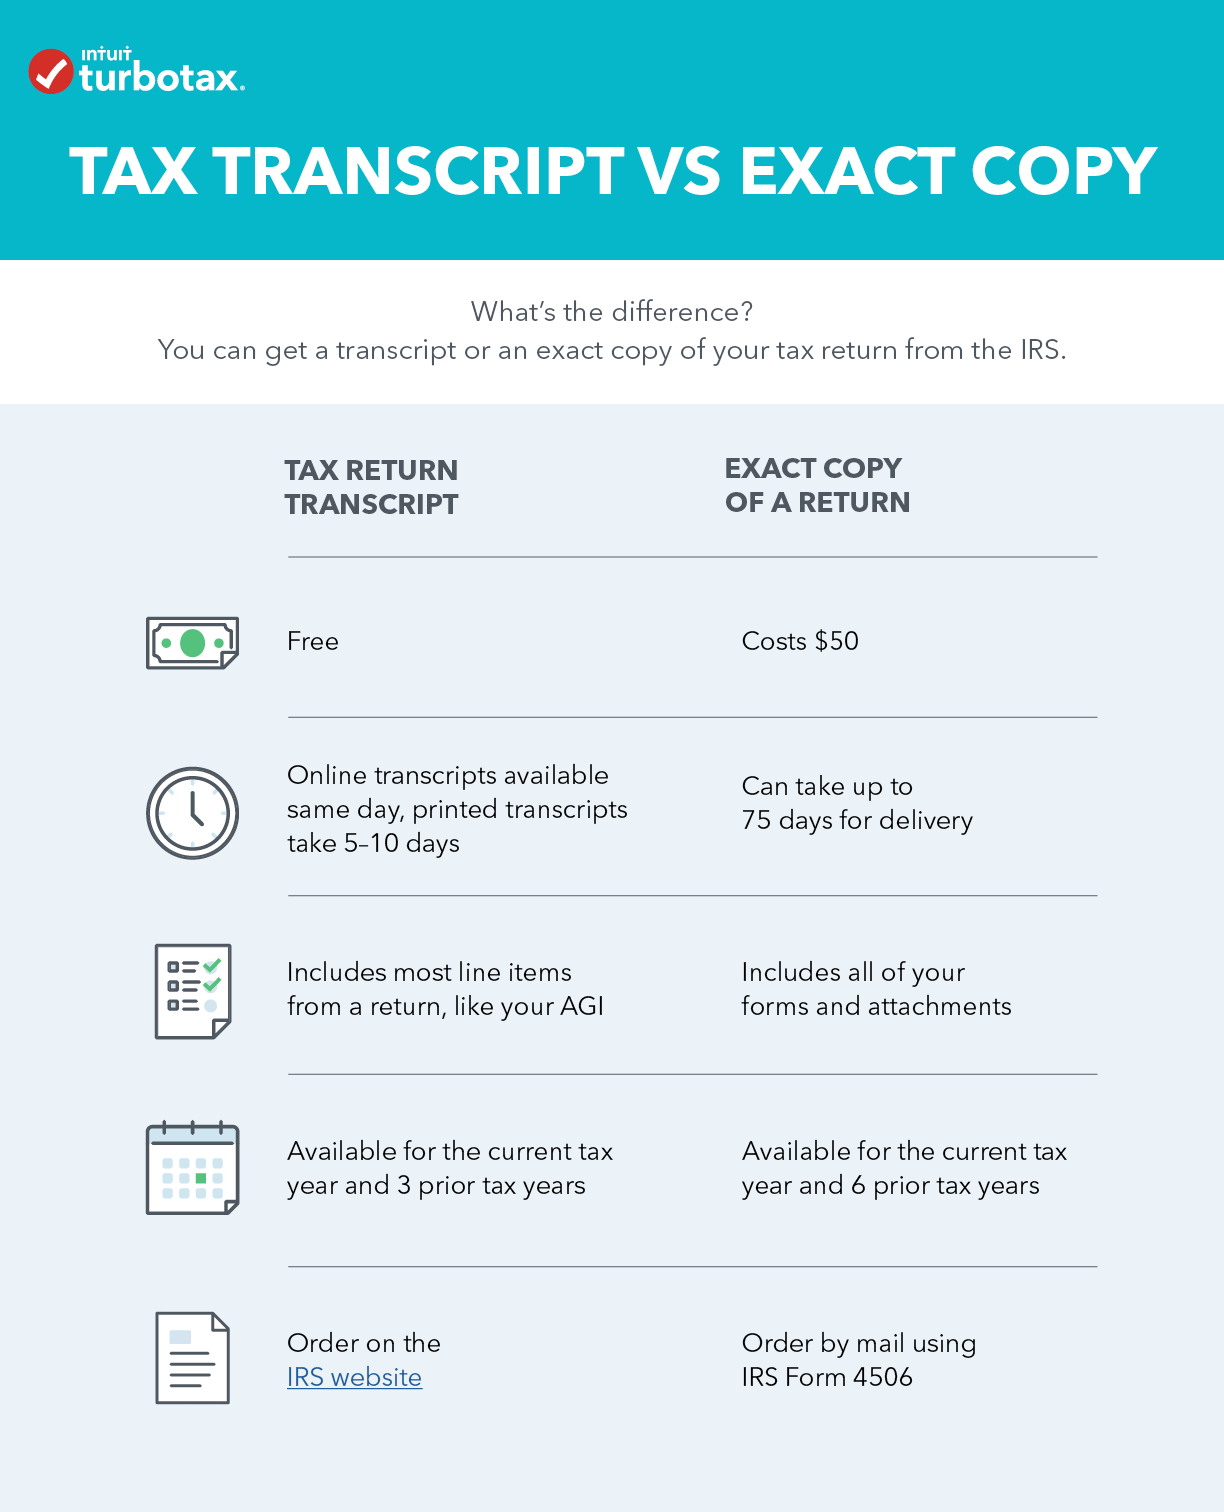 how-do-i-get-a-copy-of-my-tax-return-or-transcript-turbotax-support